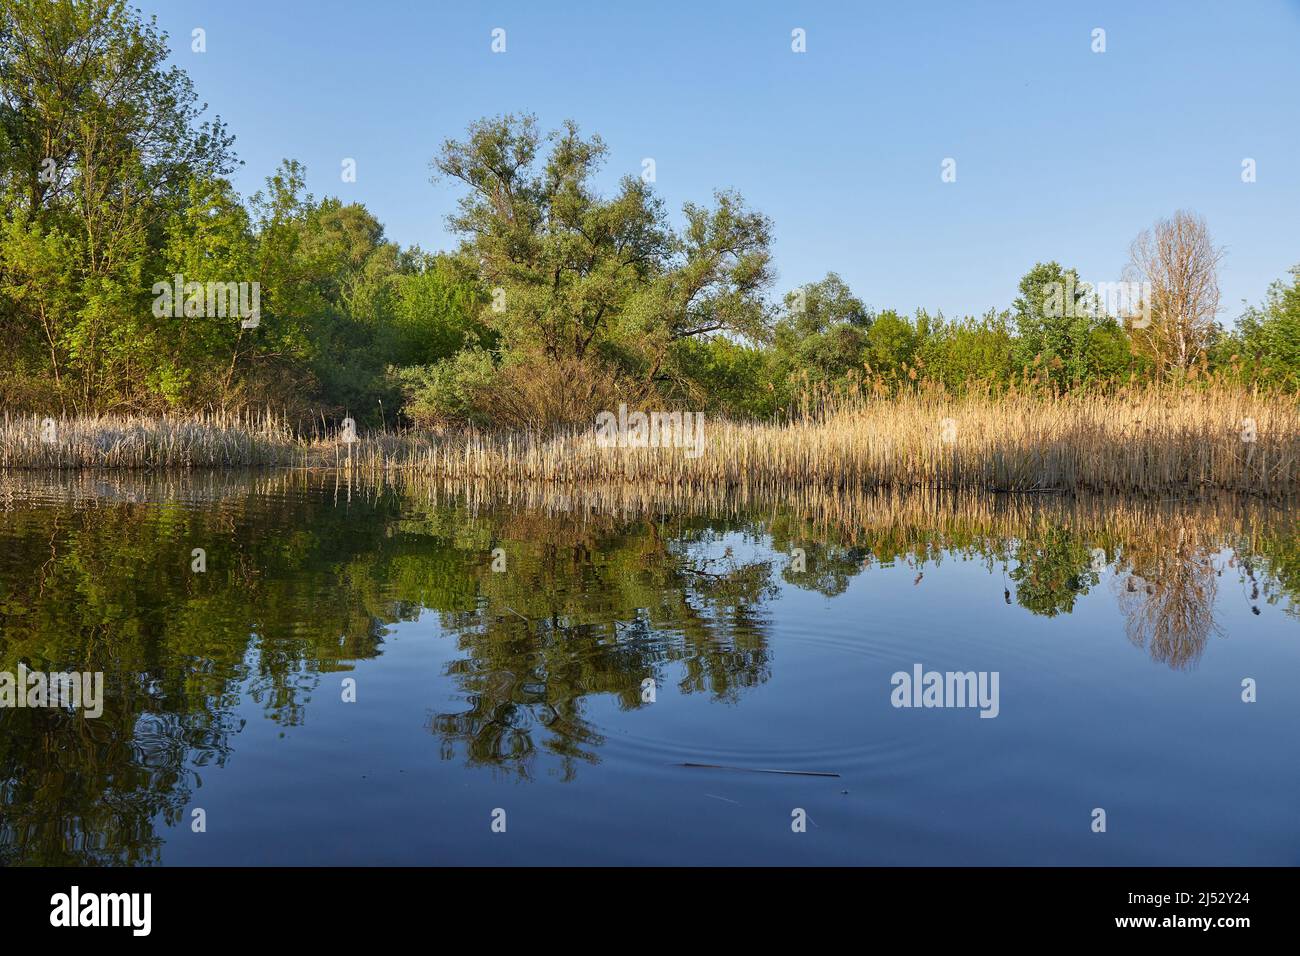 Water surface with trees Stock Photo